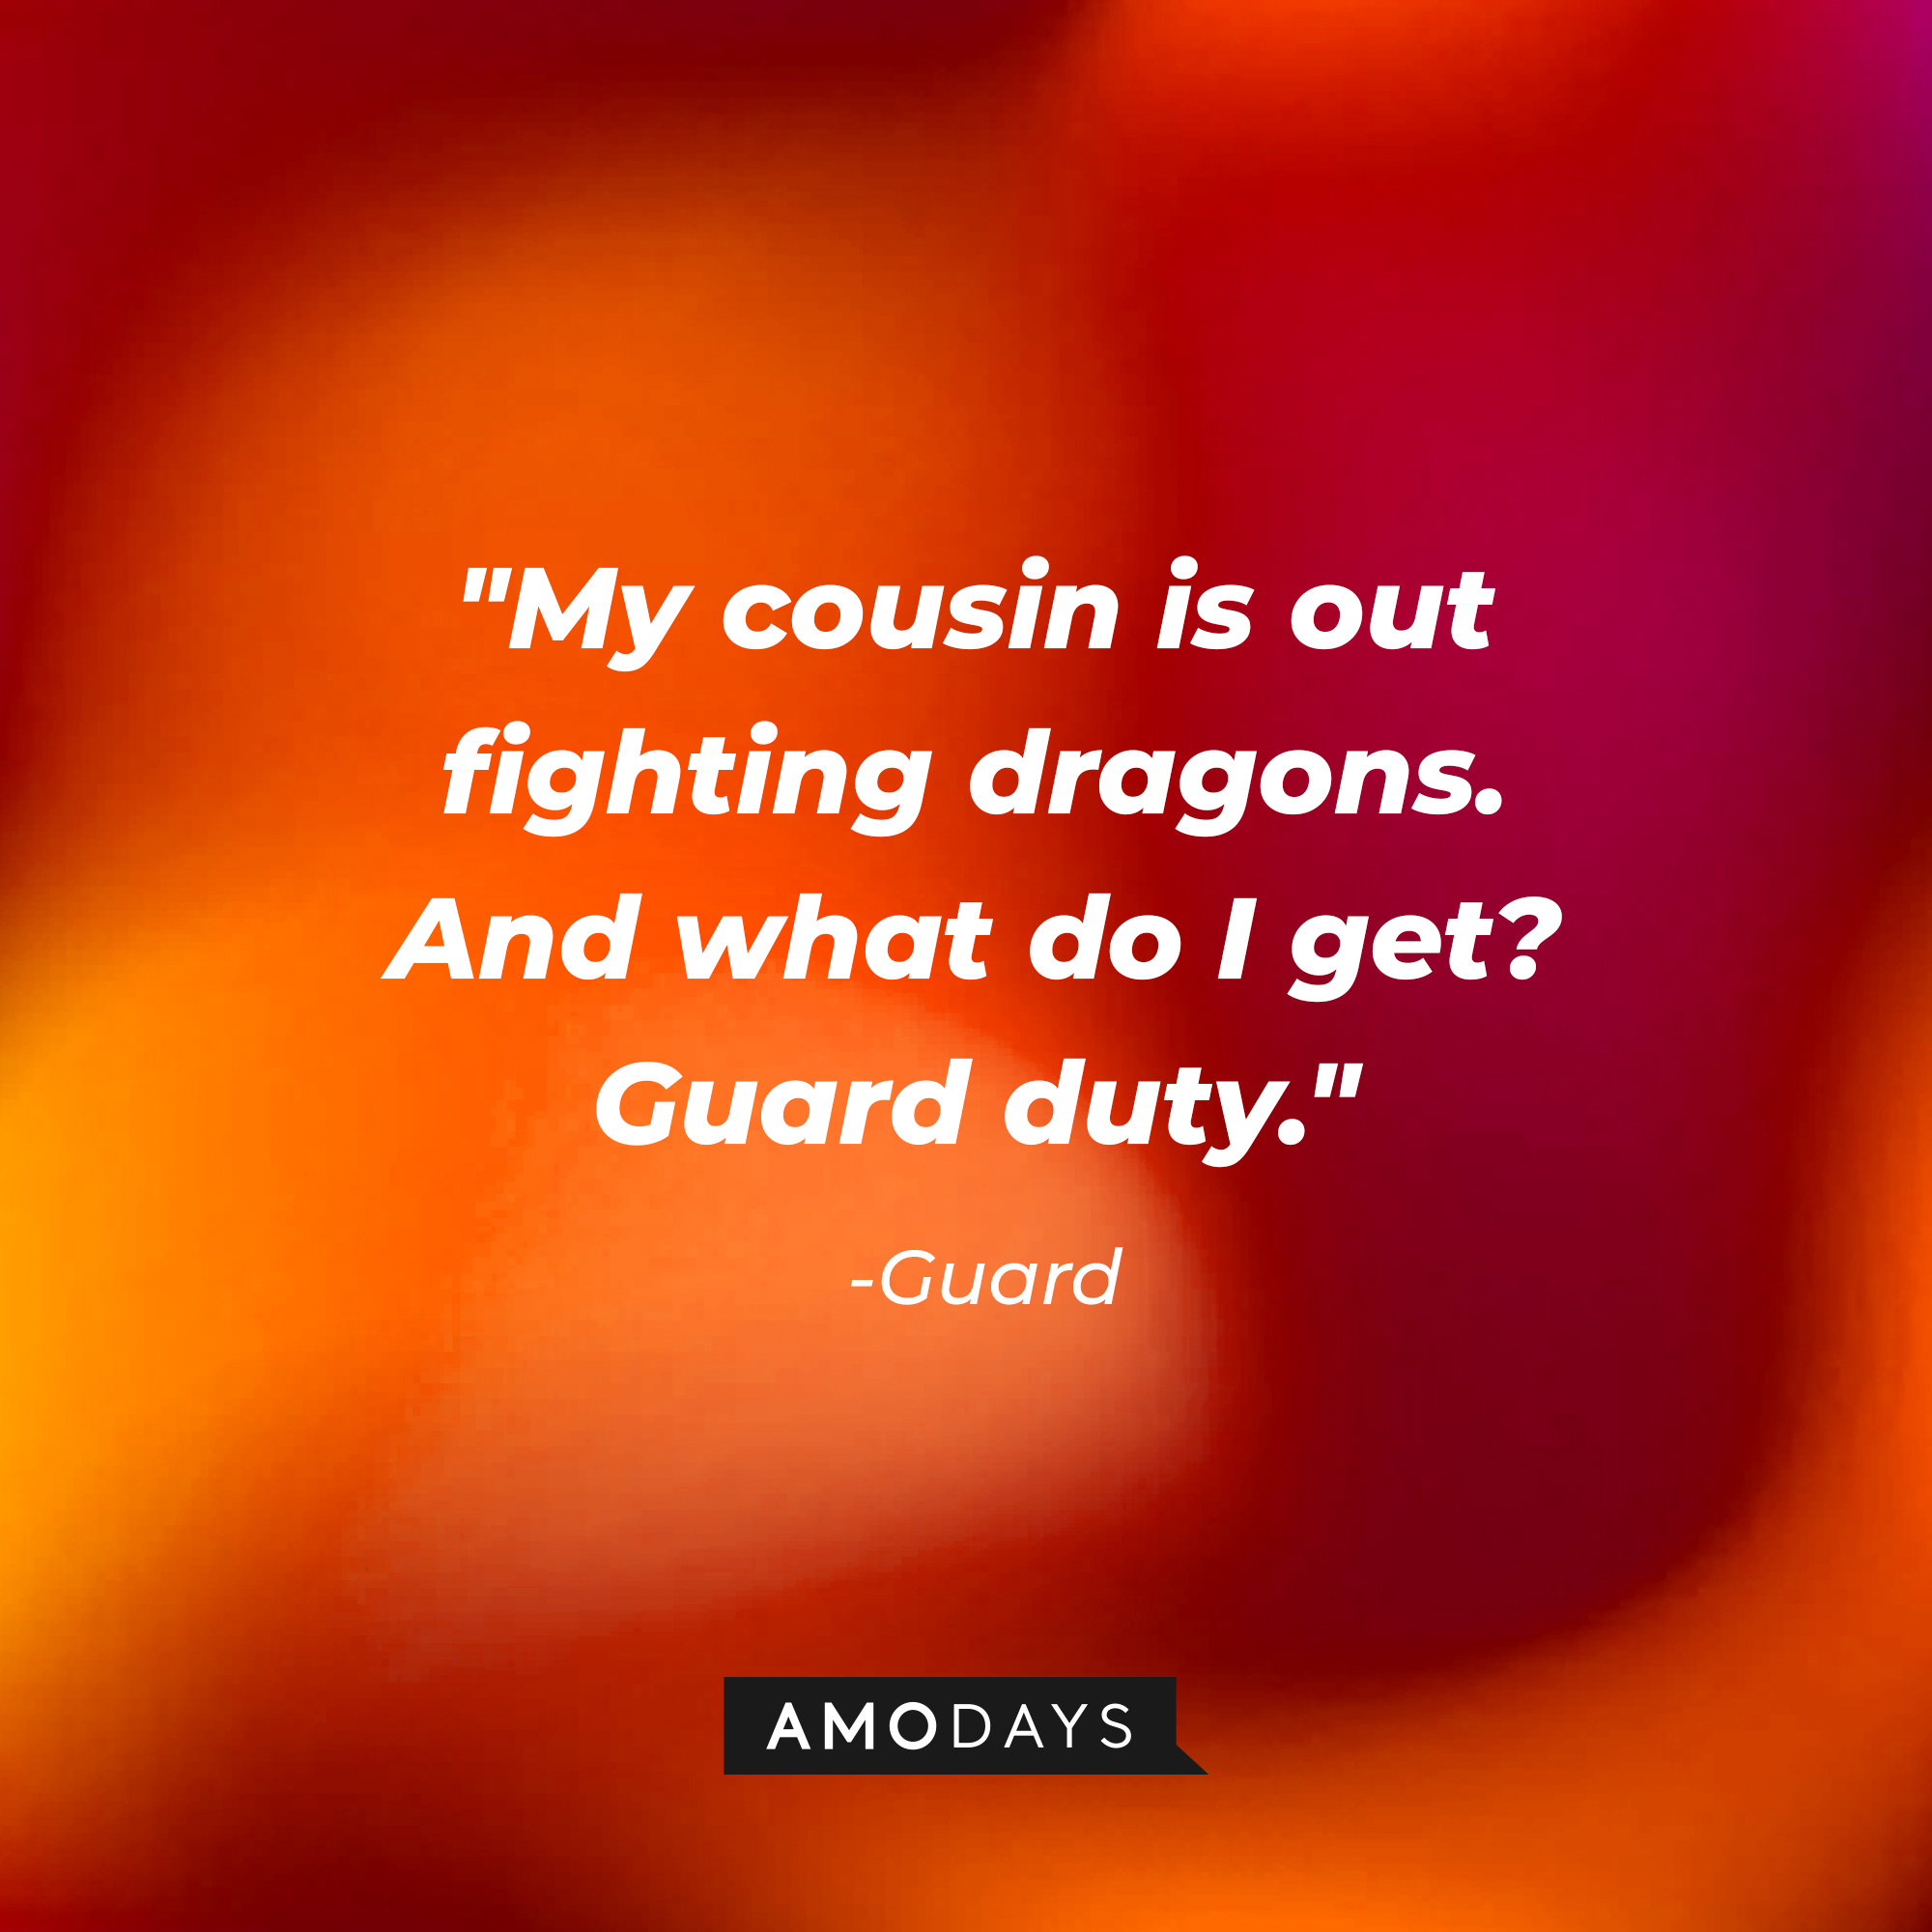 Guard's quote: "My cousin is out fighting dragons. And what do I get? Guard duty." | Source: Amodays